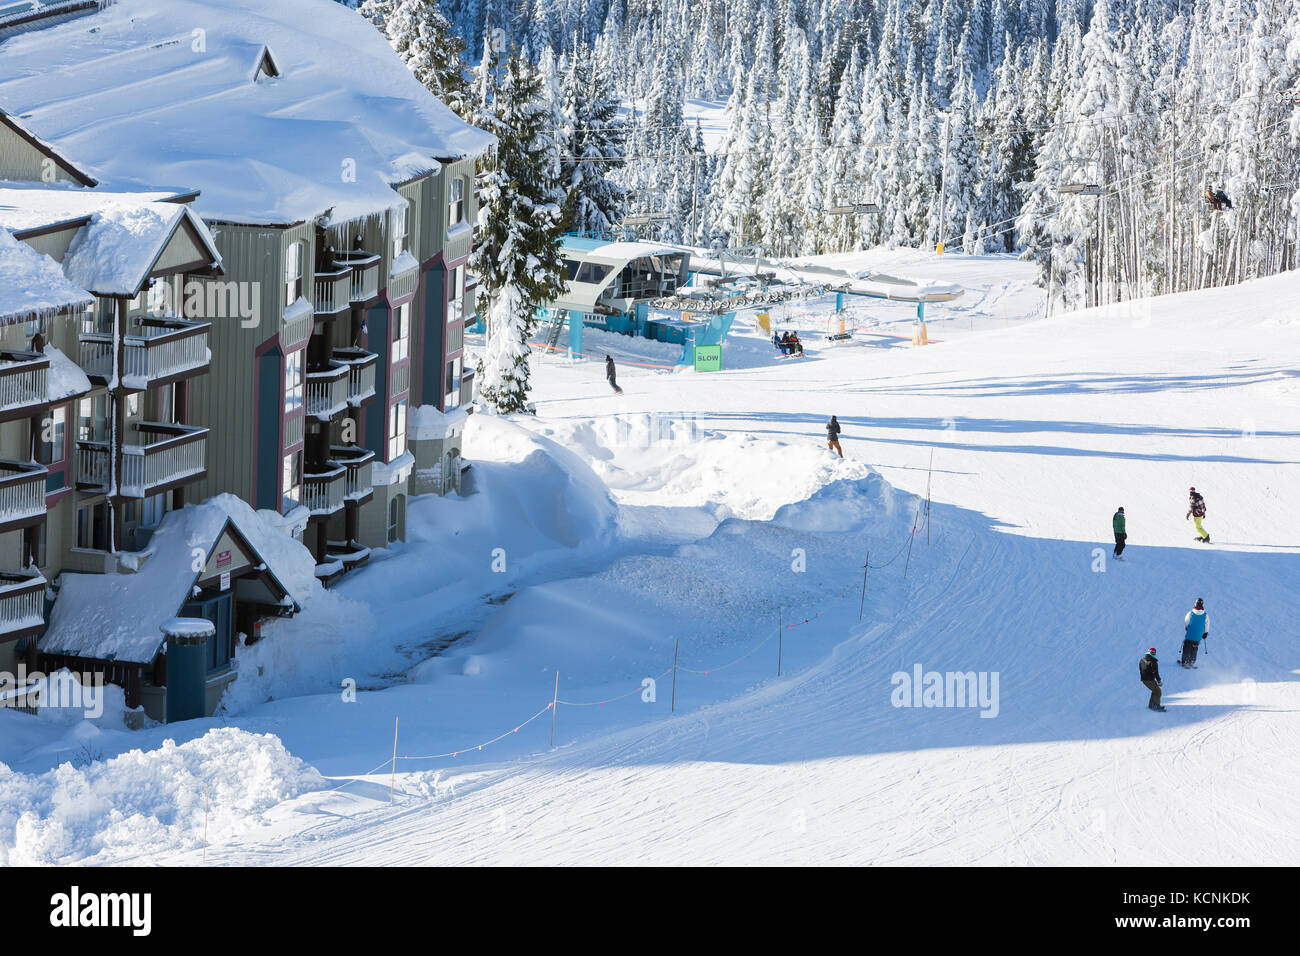 Skiers and snowboarders scoot past slopeside accommodations on Mt. Washington's Linton's Loop, The Comox Valley, Vancouver Island, Britiah Columbia, Canada Stock Photo